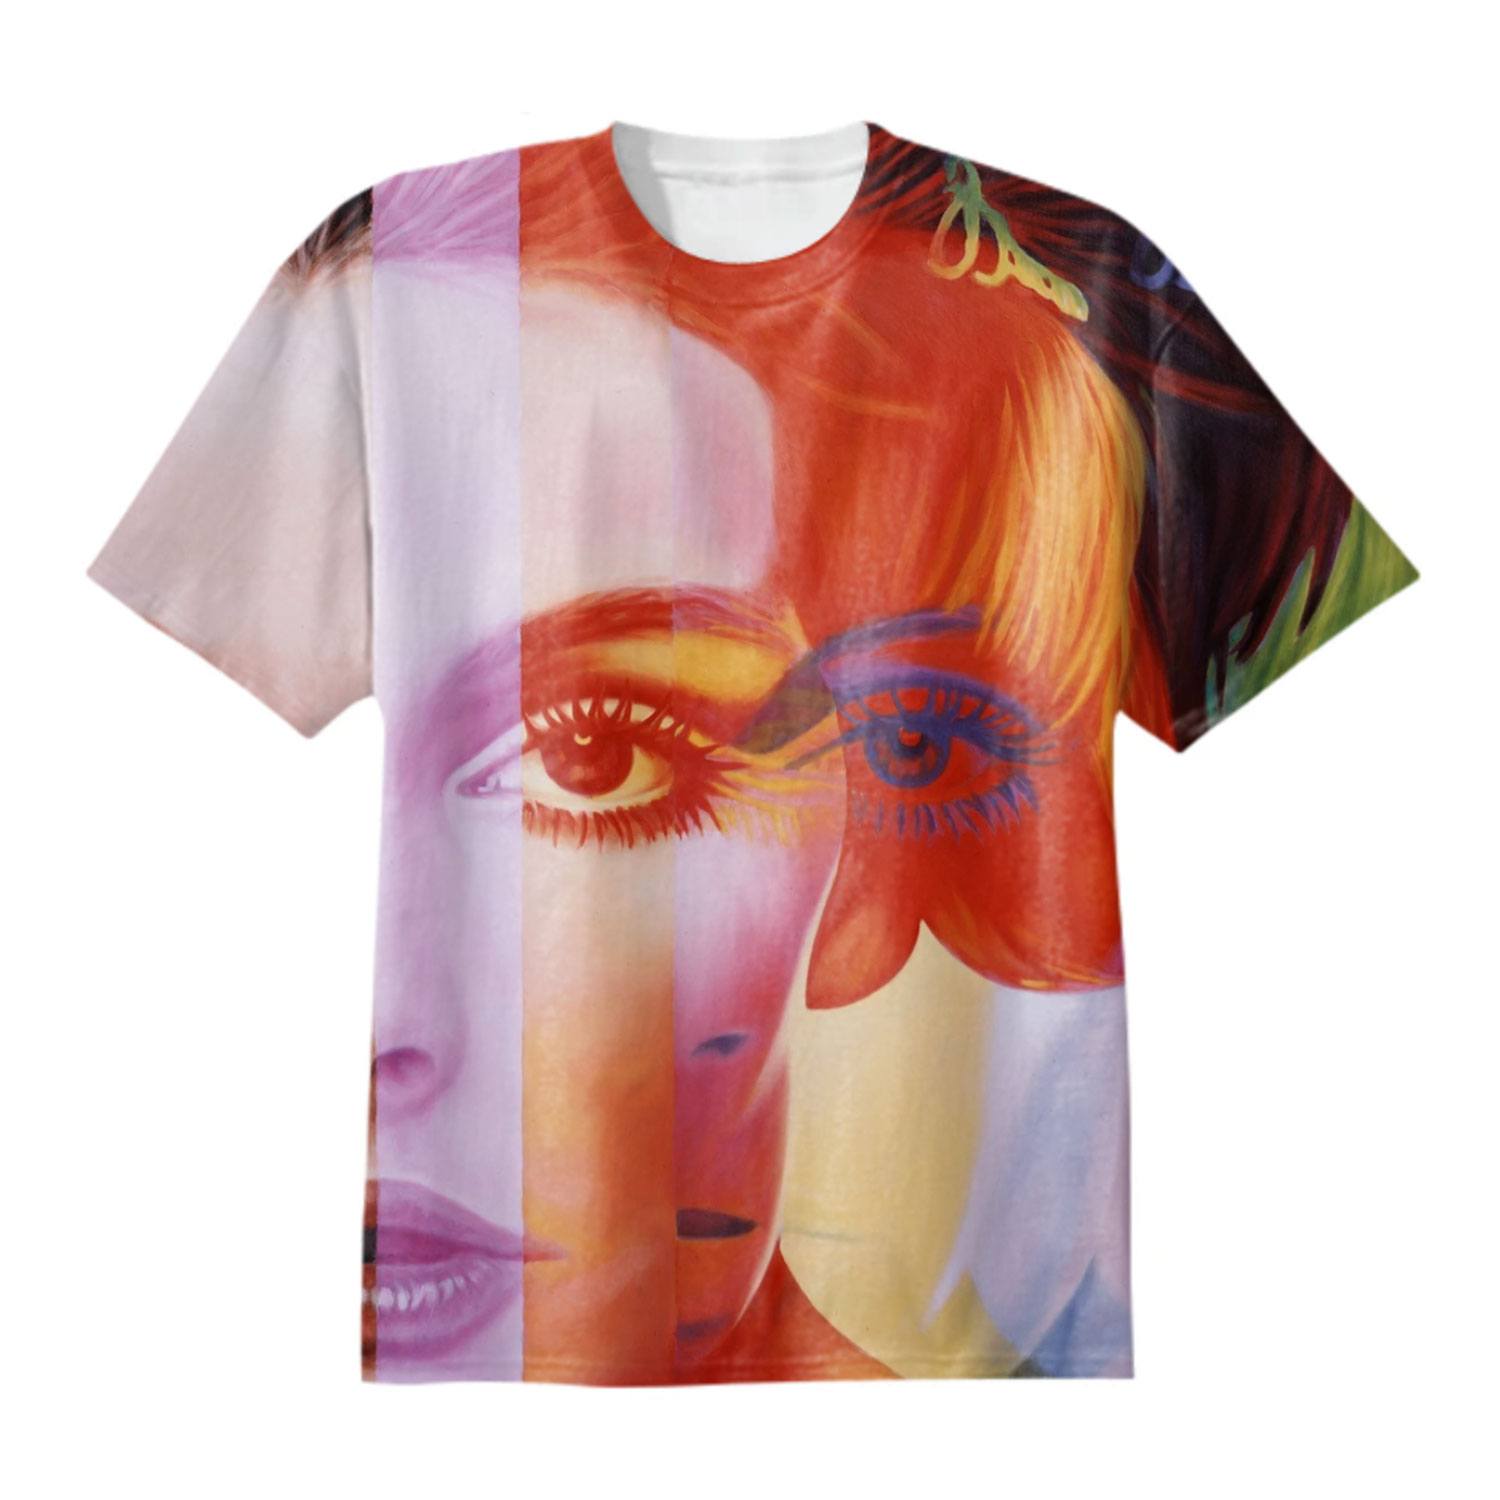 A T-shirt designed by Richard Phillips for Rainbow Contemporary features the artist’s Spectrum graphic.